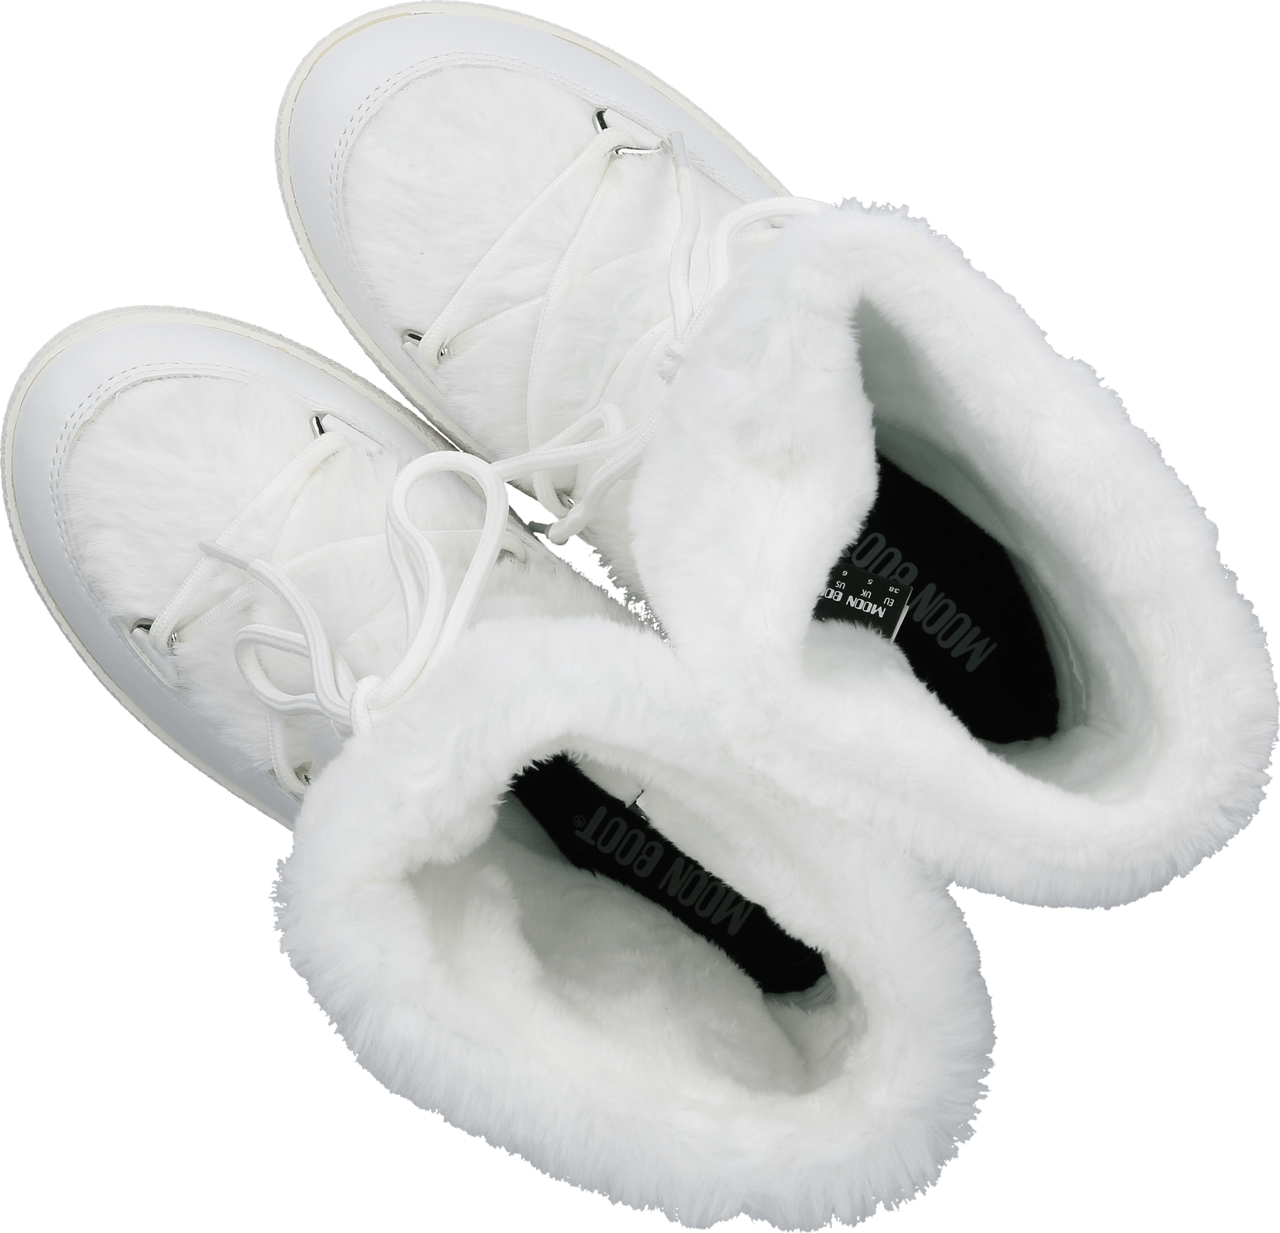 Moon Boot Snowboots Ltrack White Arktic Wit